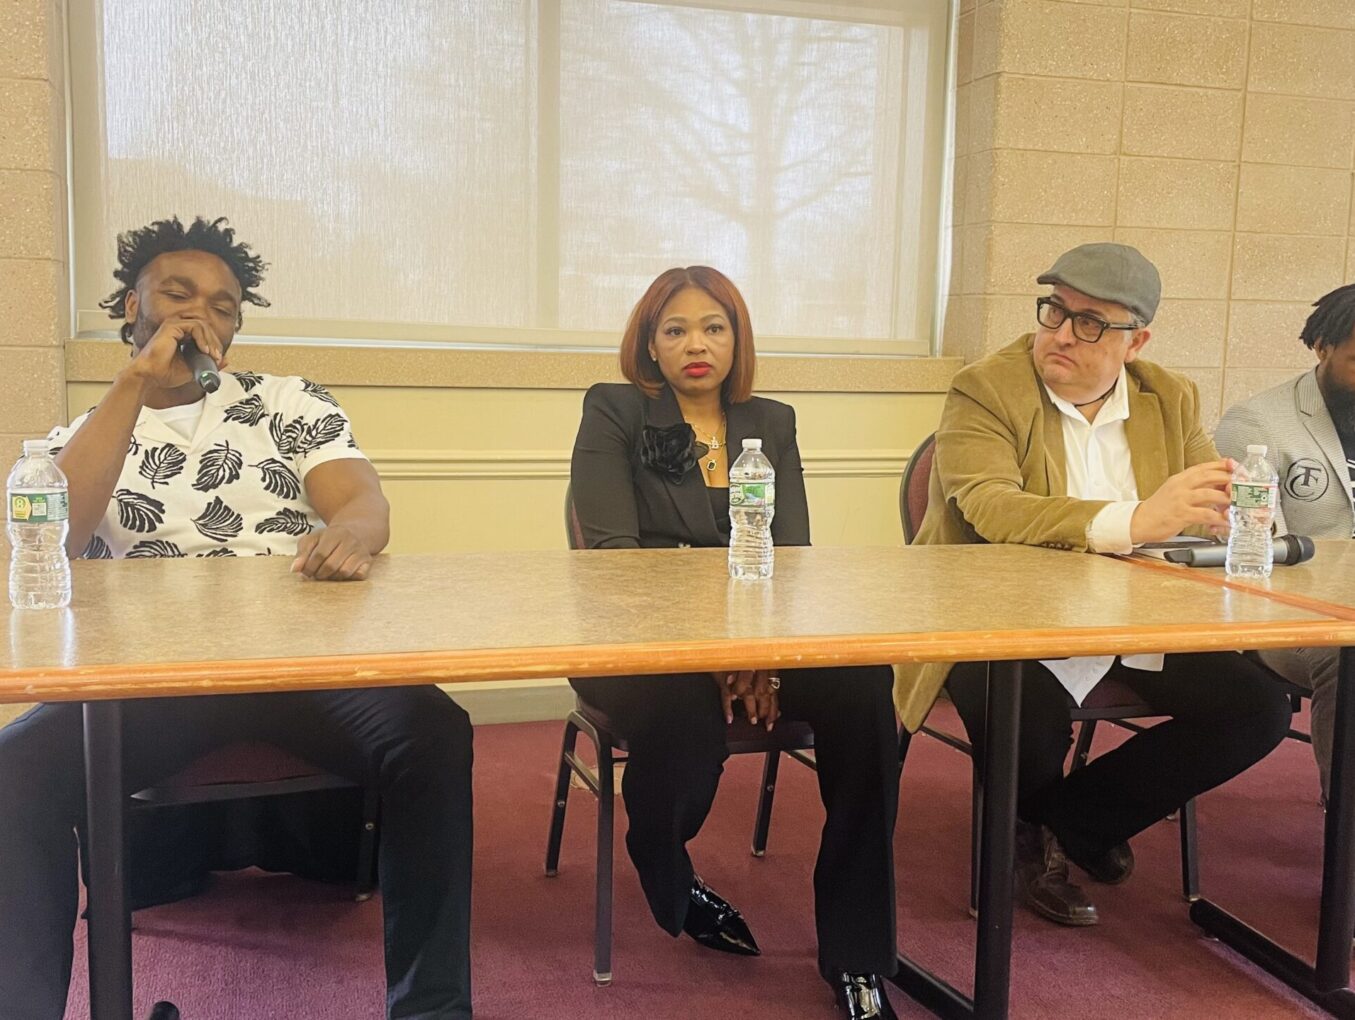 “From Prison to Purpose” Panel Inspires Audiences